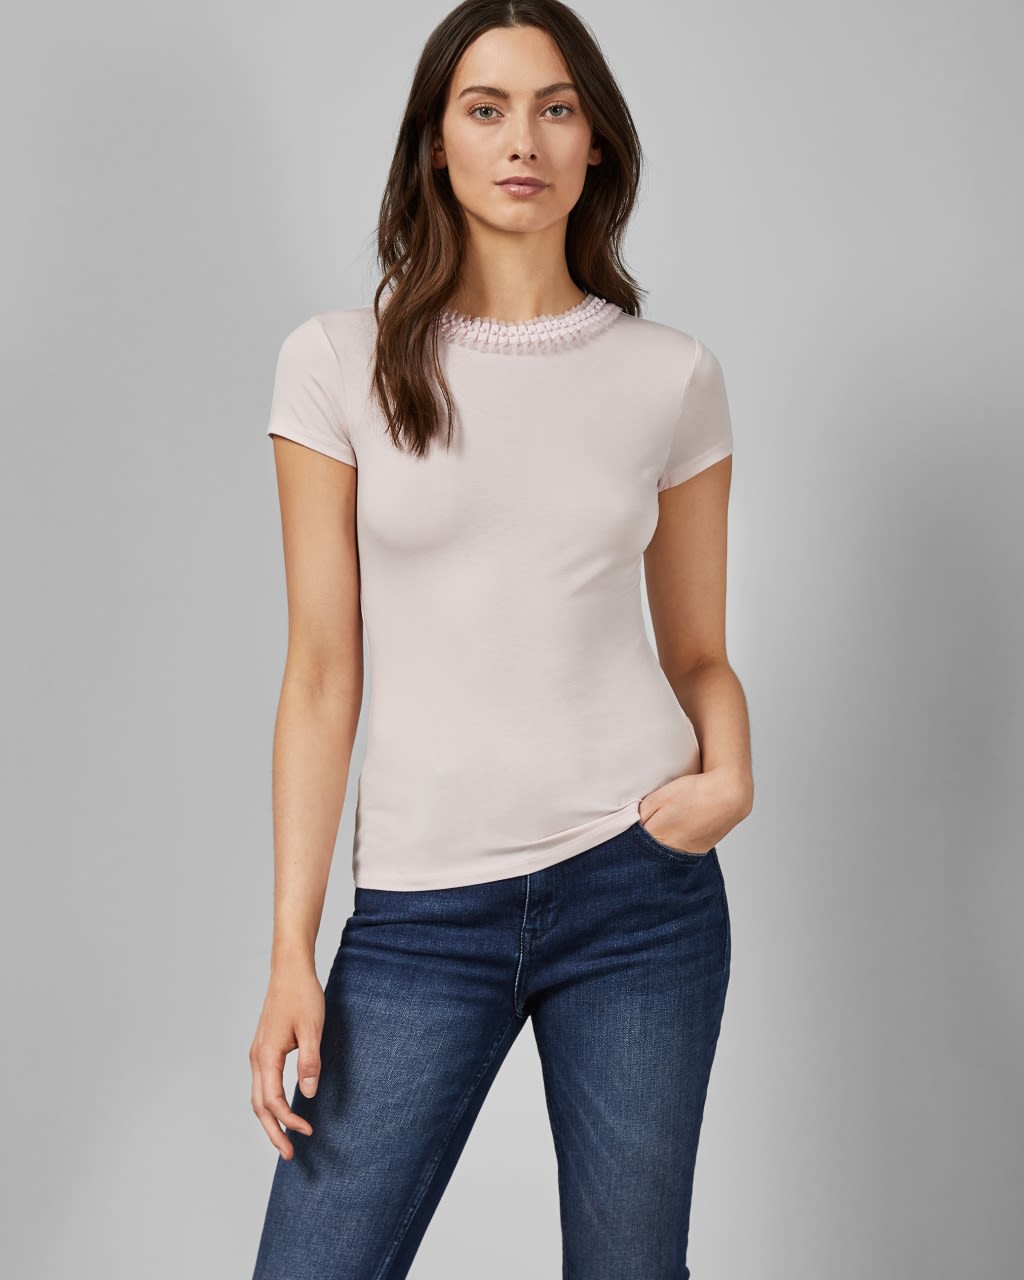 Ted Baker Women's Frill Neck Fitted T-Shirt in Nude-Pink, Jacii